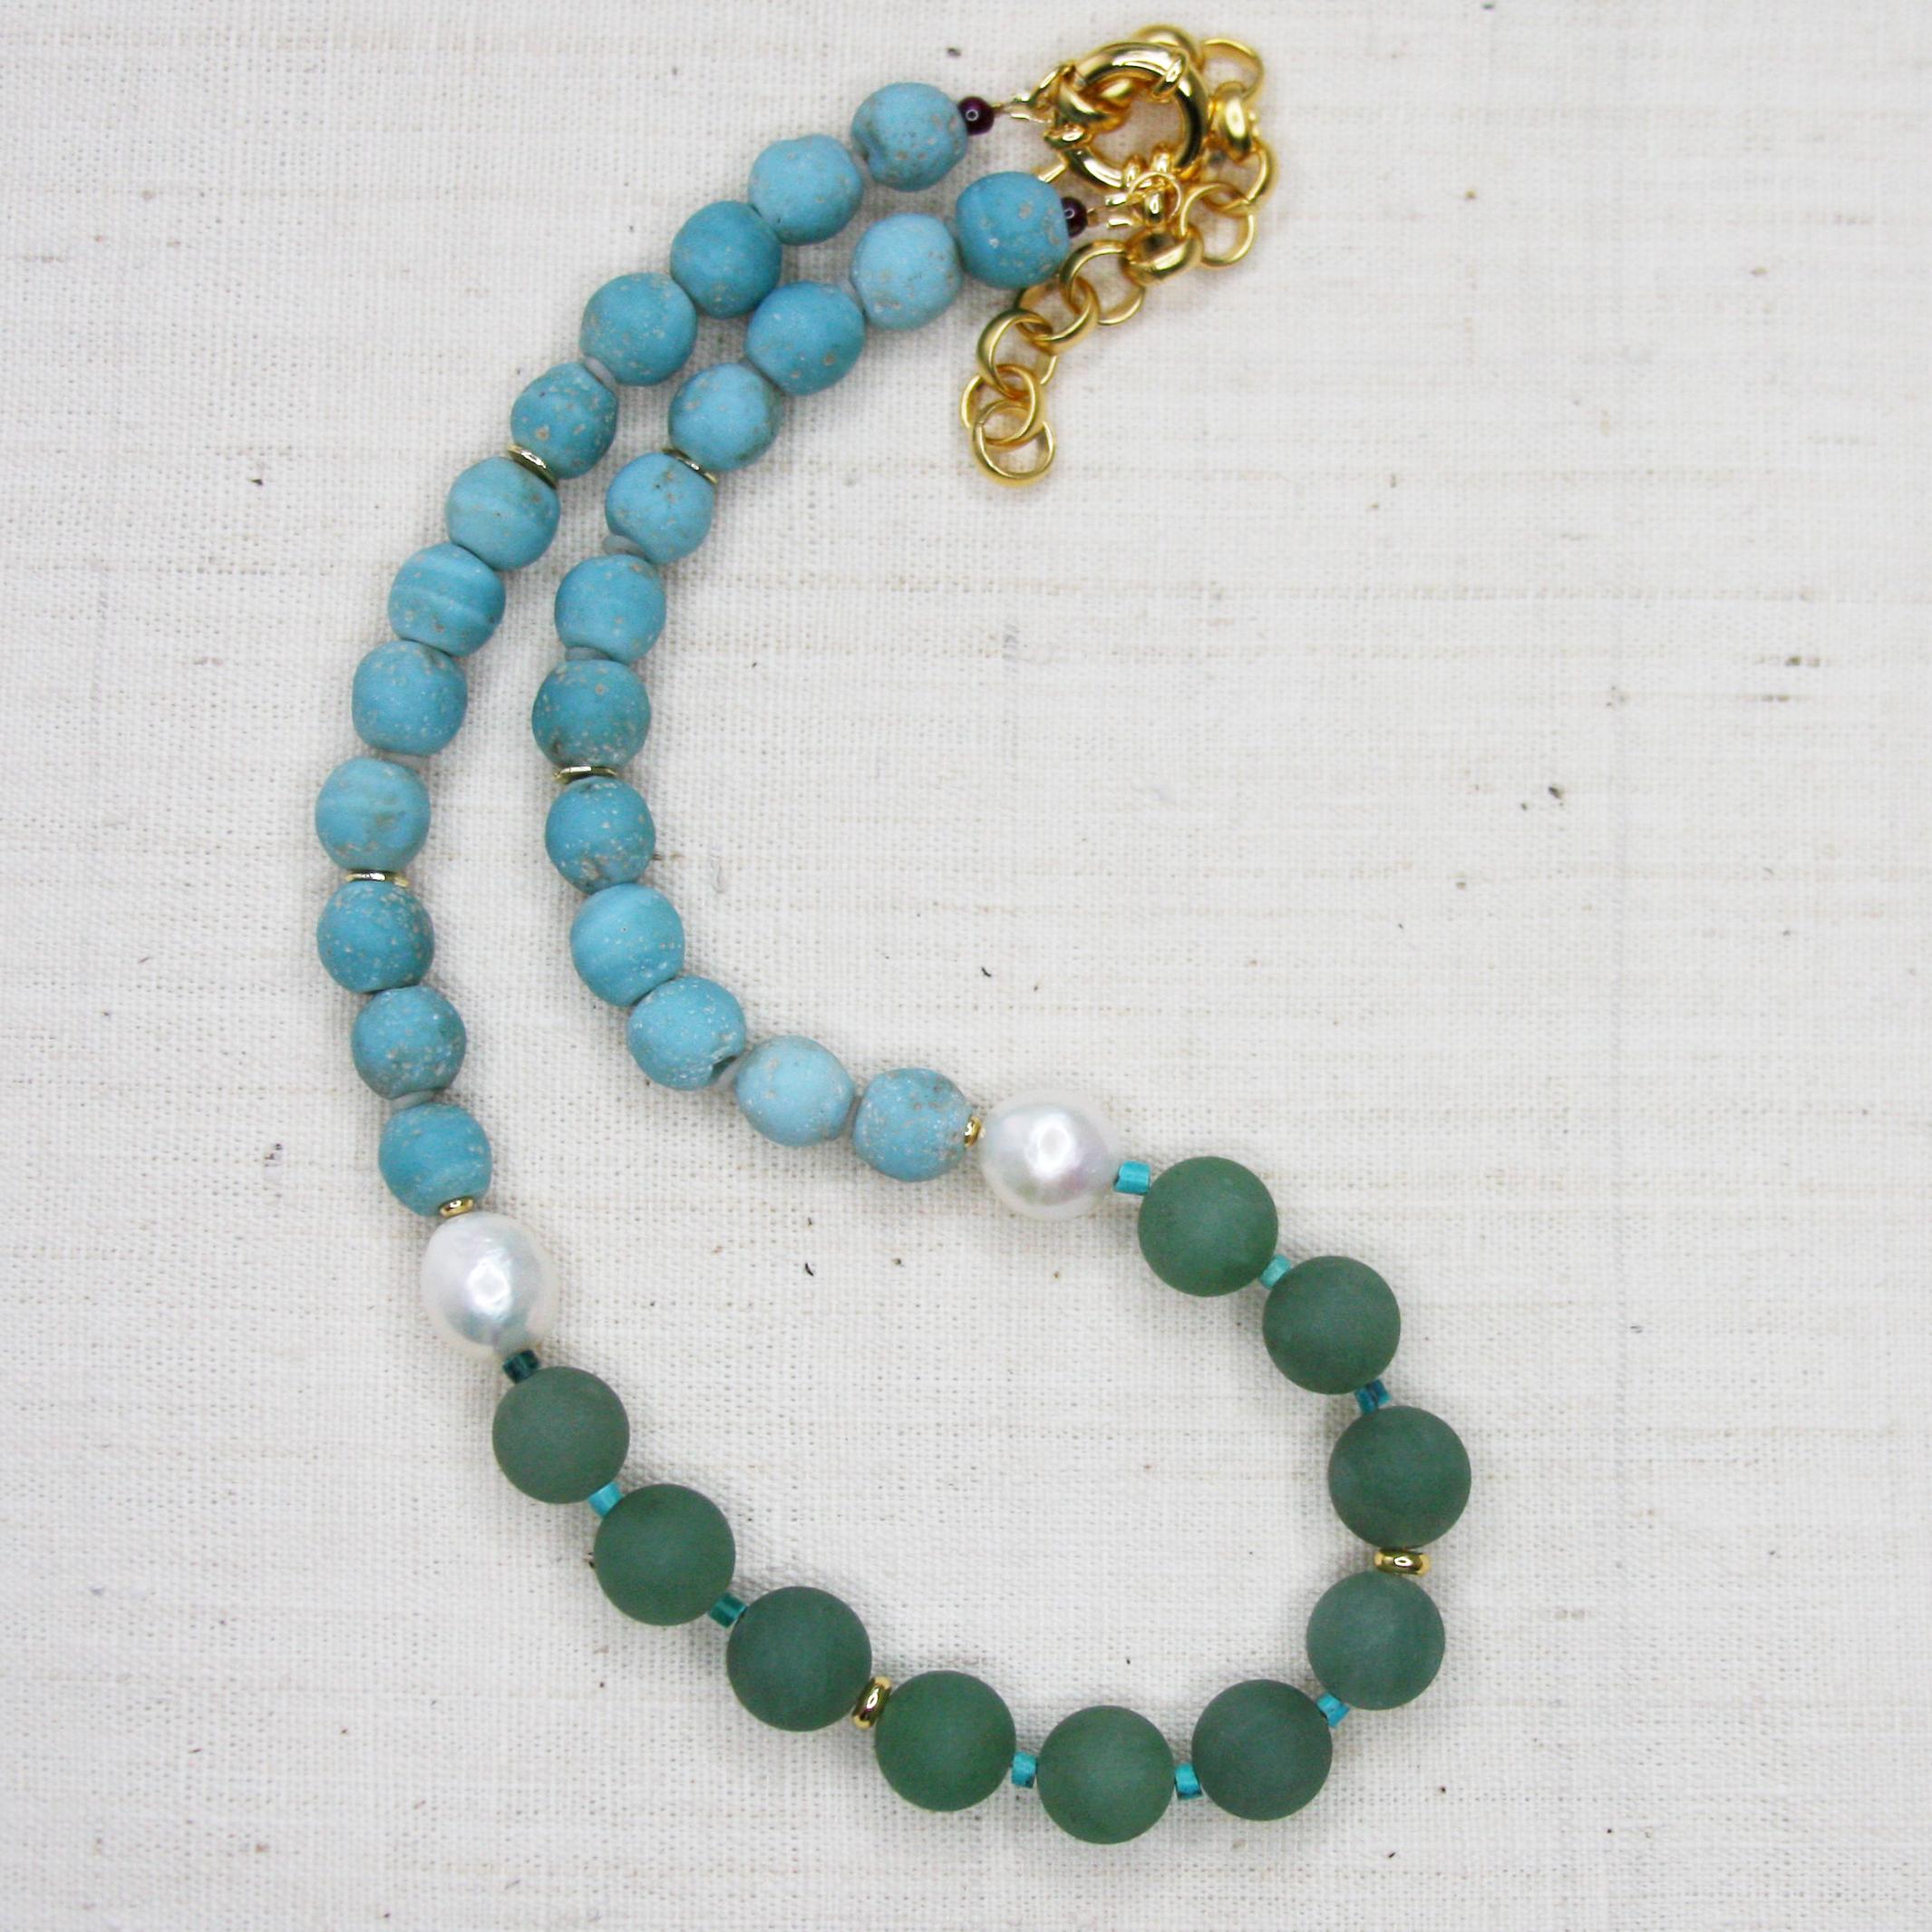 This necklace is crafted from natural Baroque pearls and handmade Ceramic beads, Aventurine gem stones, inspired by Monet's 'Branch of the Seine near Giverny' oil painting.
	•	20